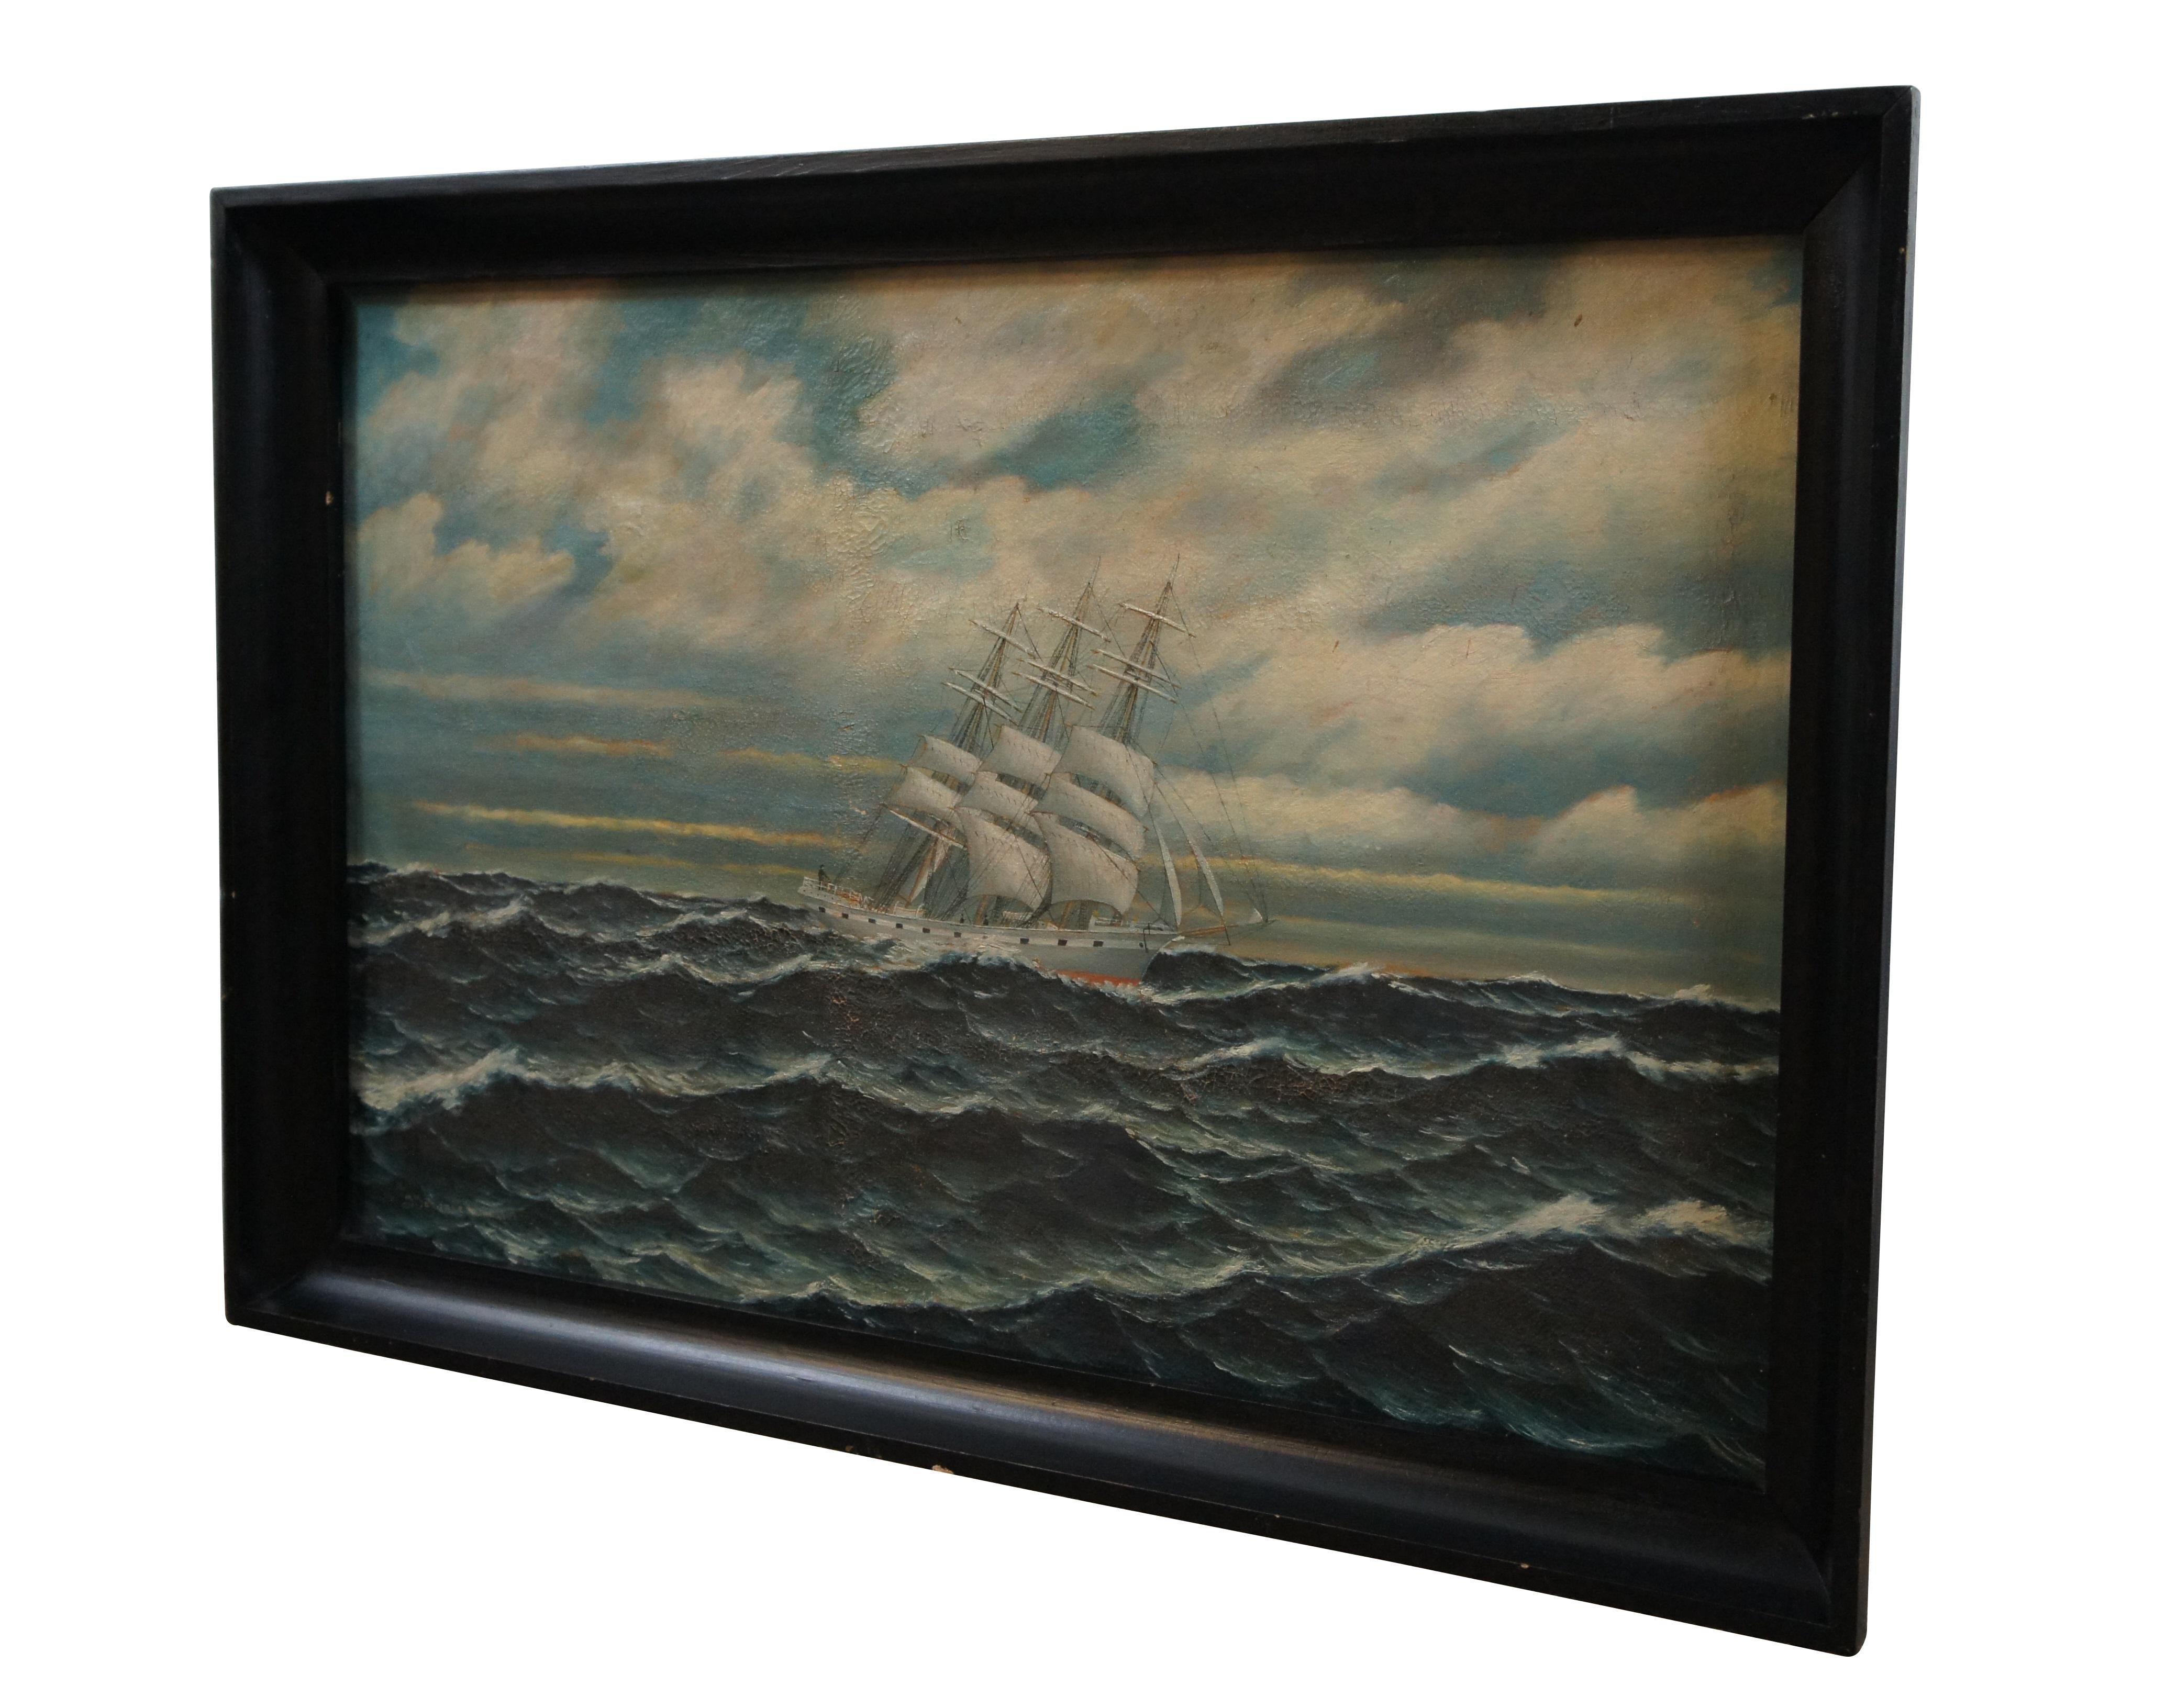 Antique Dutch School oil painting on canvas showing a yacht / clipper ship on a choppy sea. Signed in lower left corner J. Johannesen (Y. Yohannsen) – 1917.

Dimensions:
36